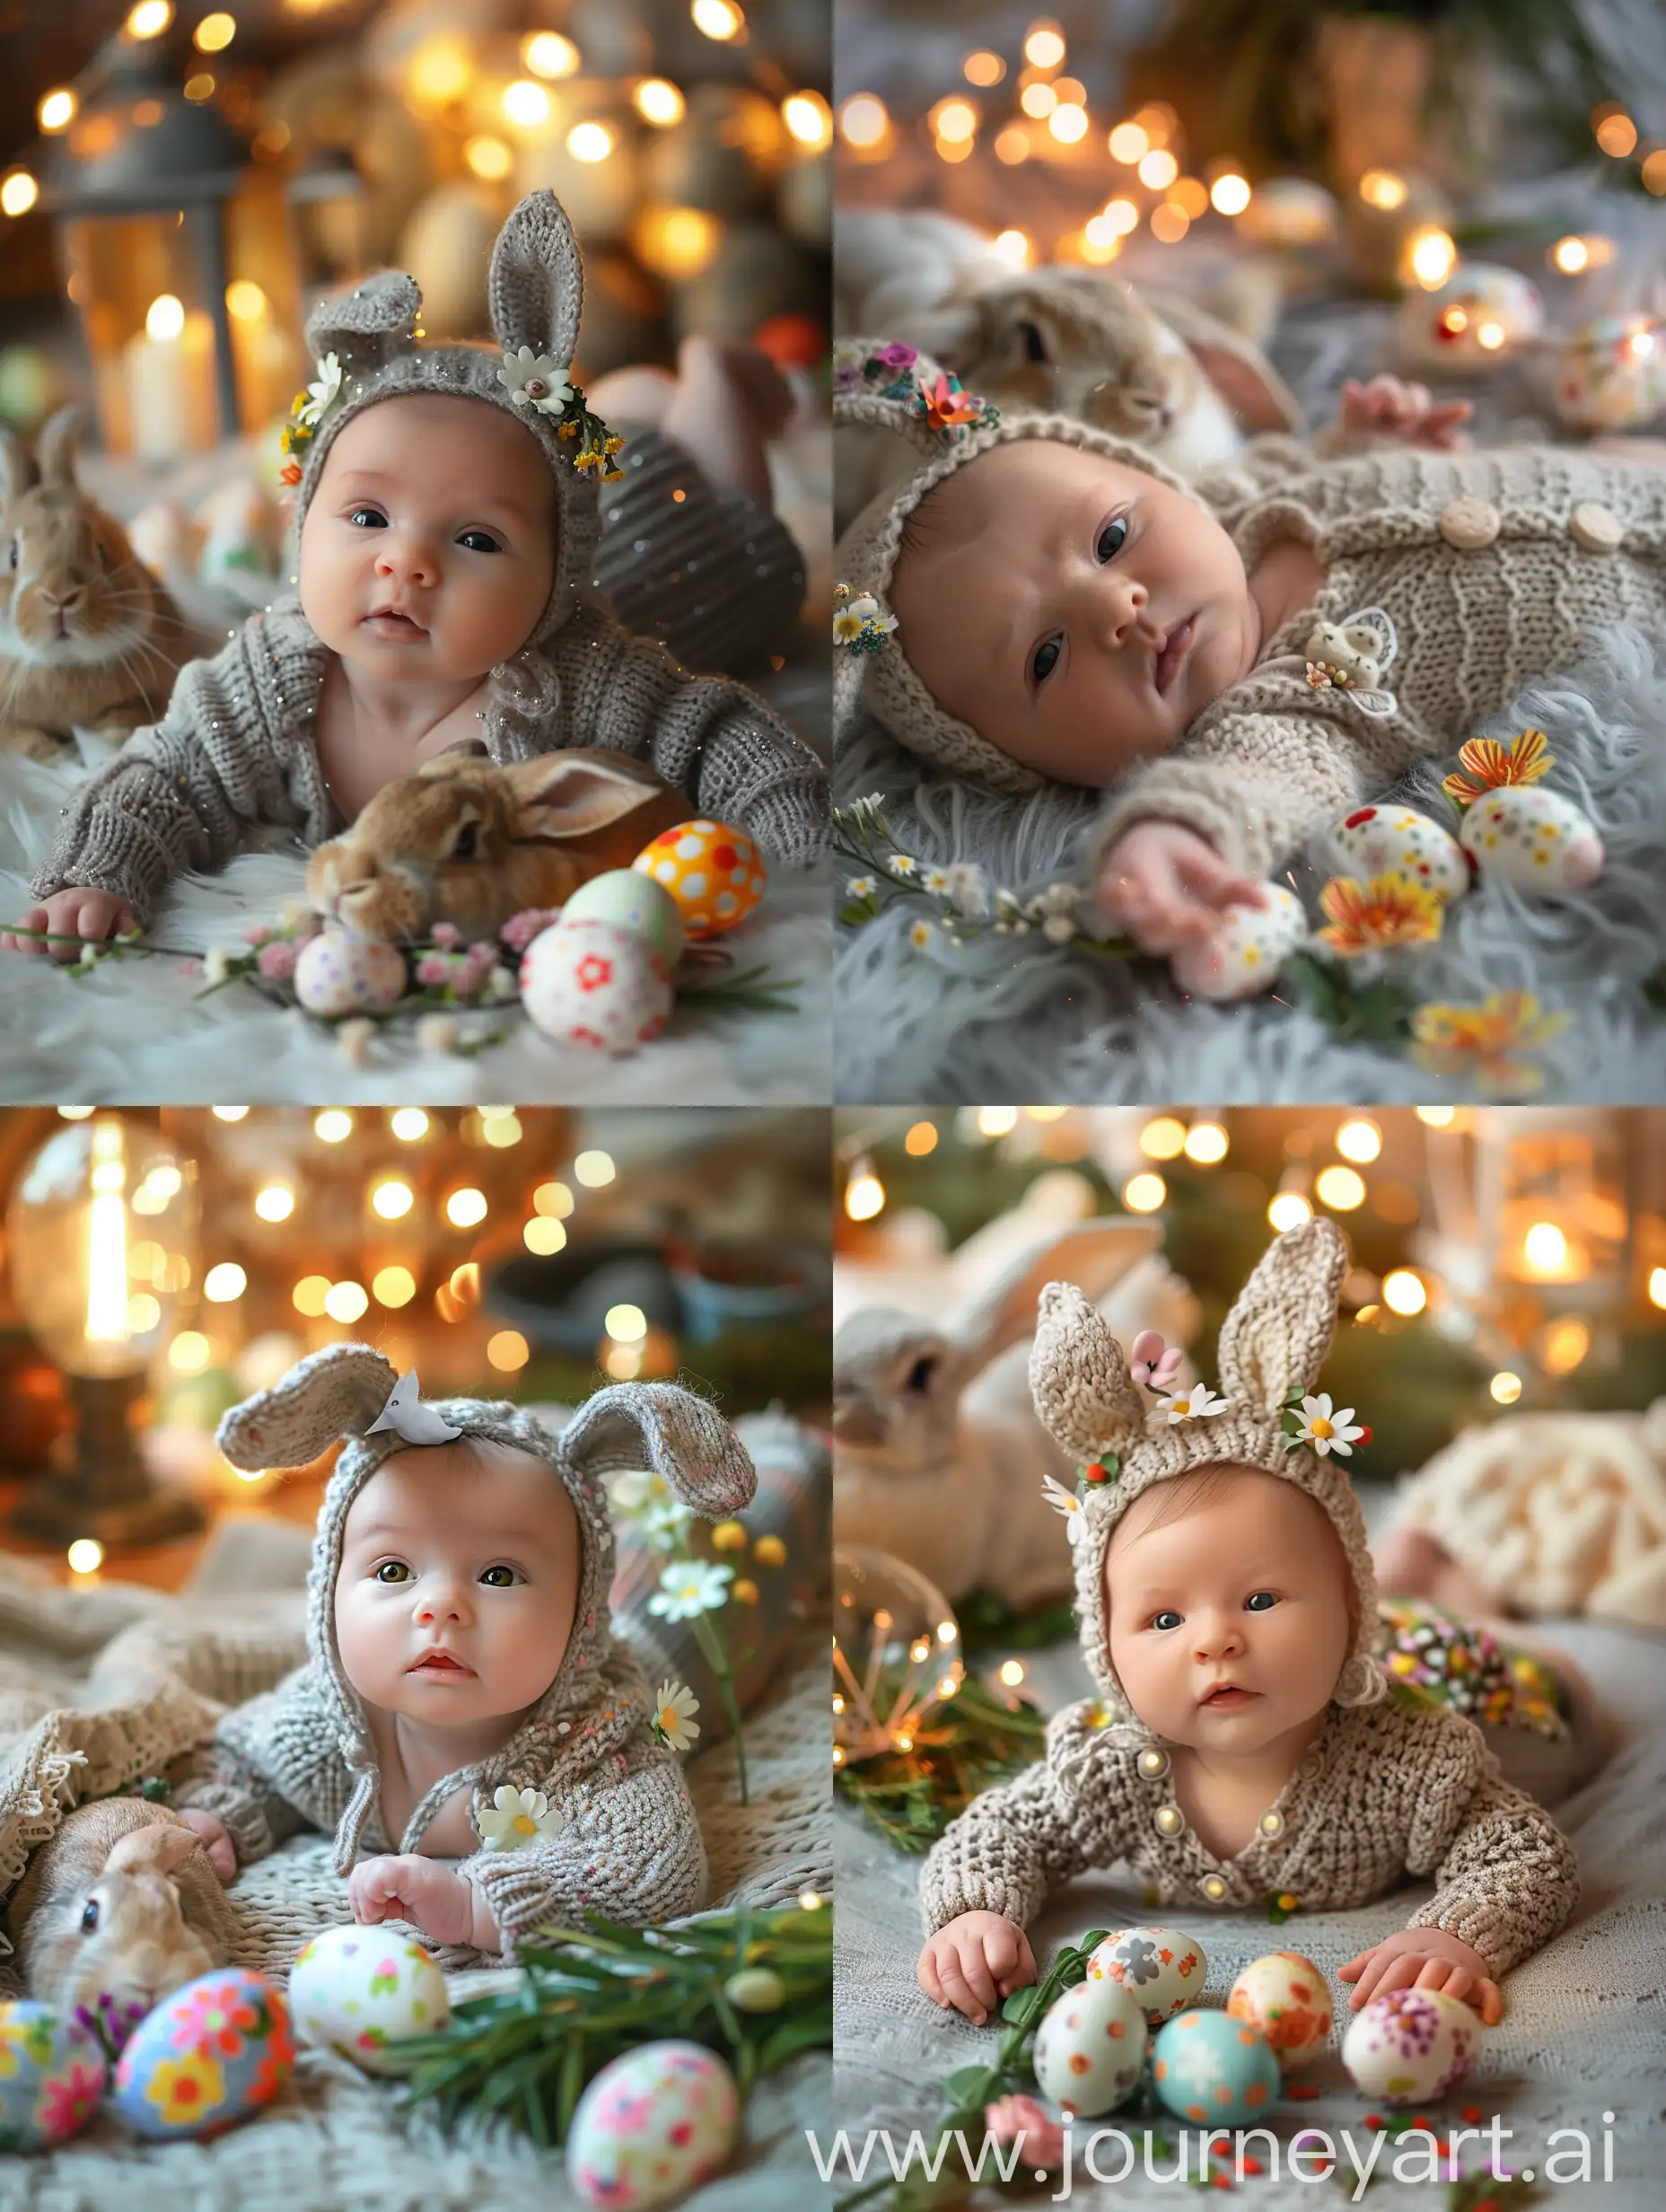 Adorable-Baby-in-Bunny-Suit-with-Easter-Decor-and-Rabbit